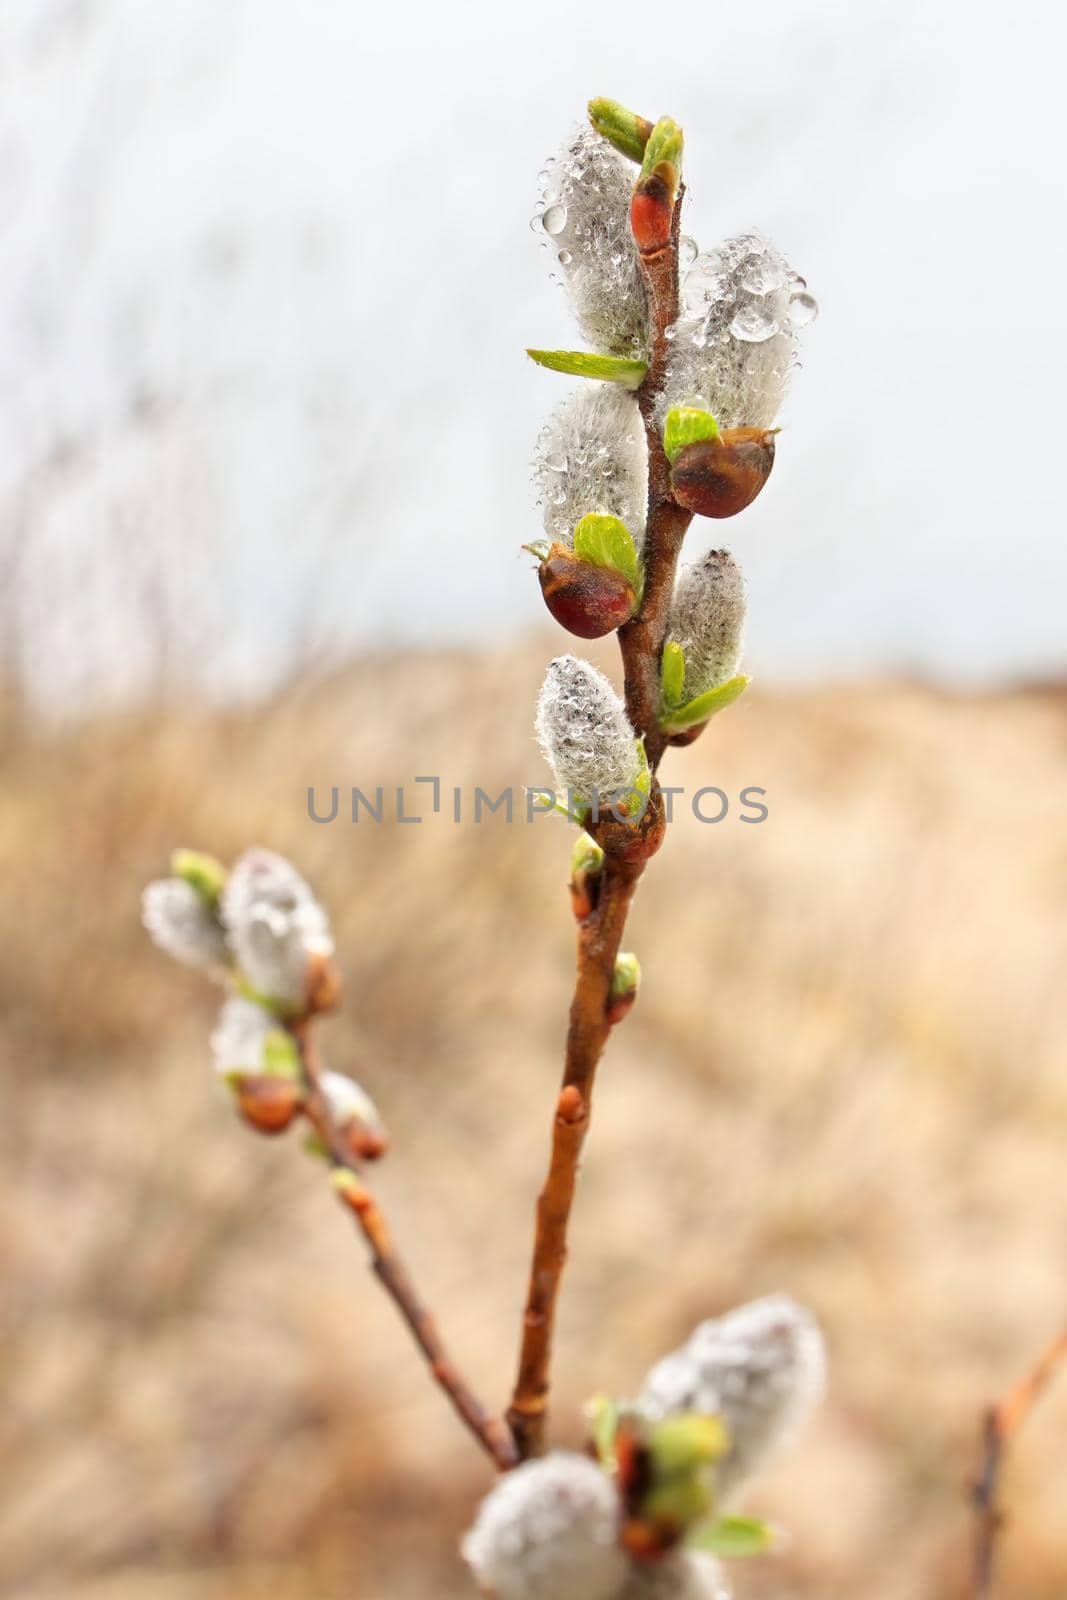 Pussy Willow Catkins Blooming in Spring Covered in Fresh Clear Raindrops by markvandam